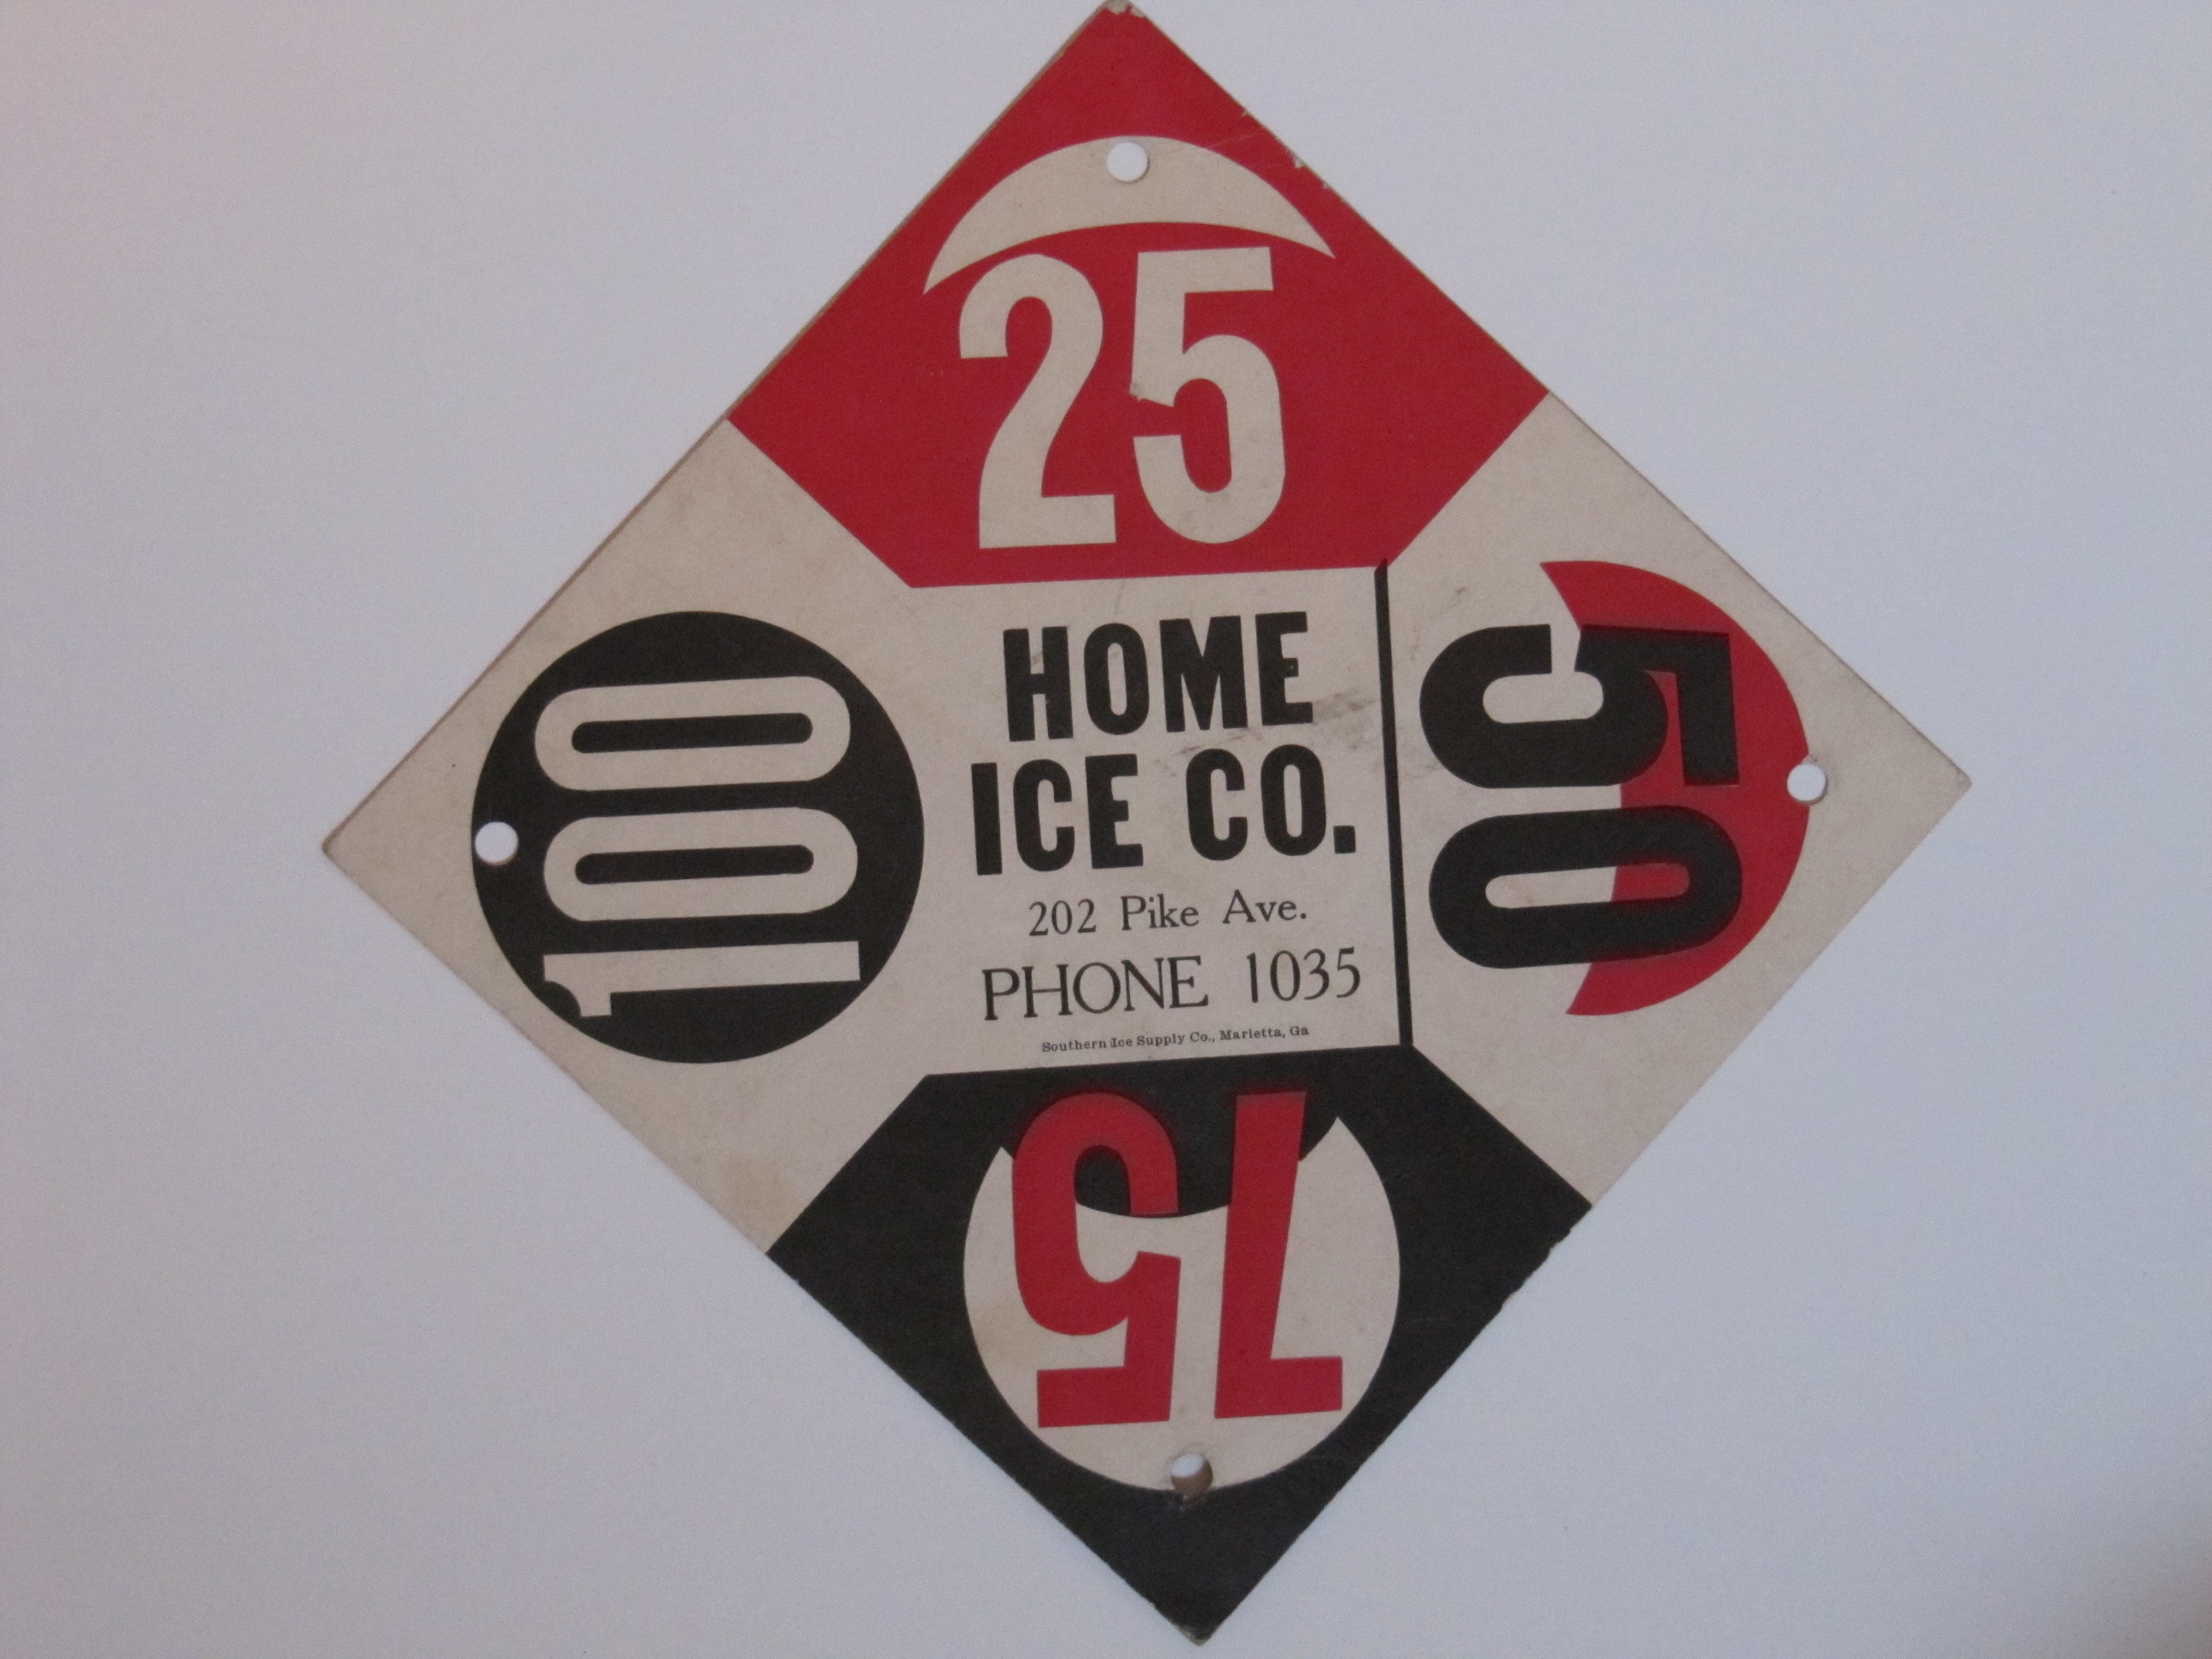 Home Ice Co